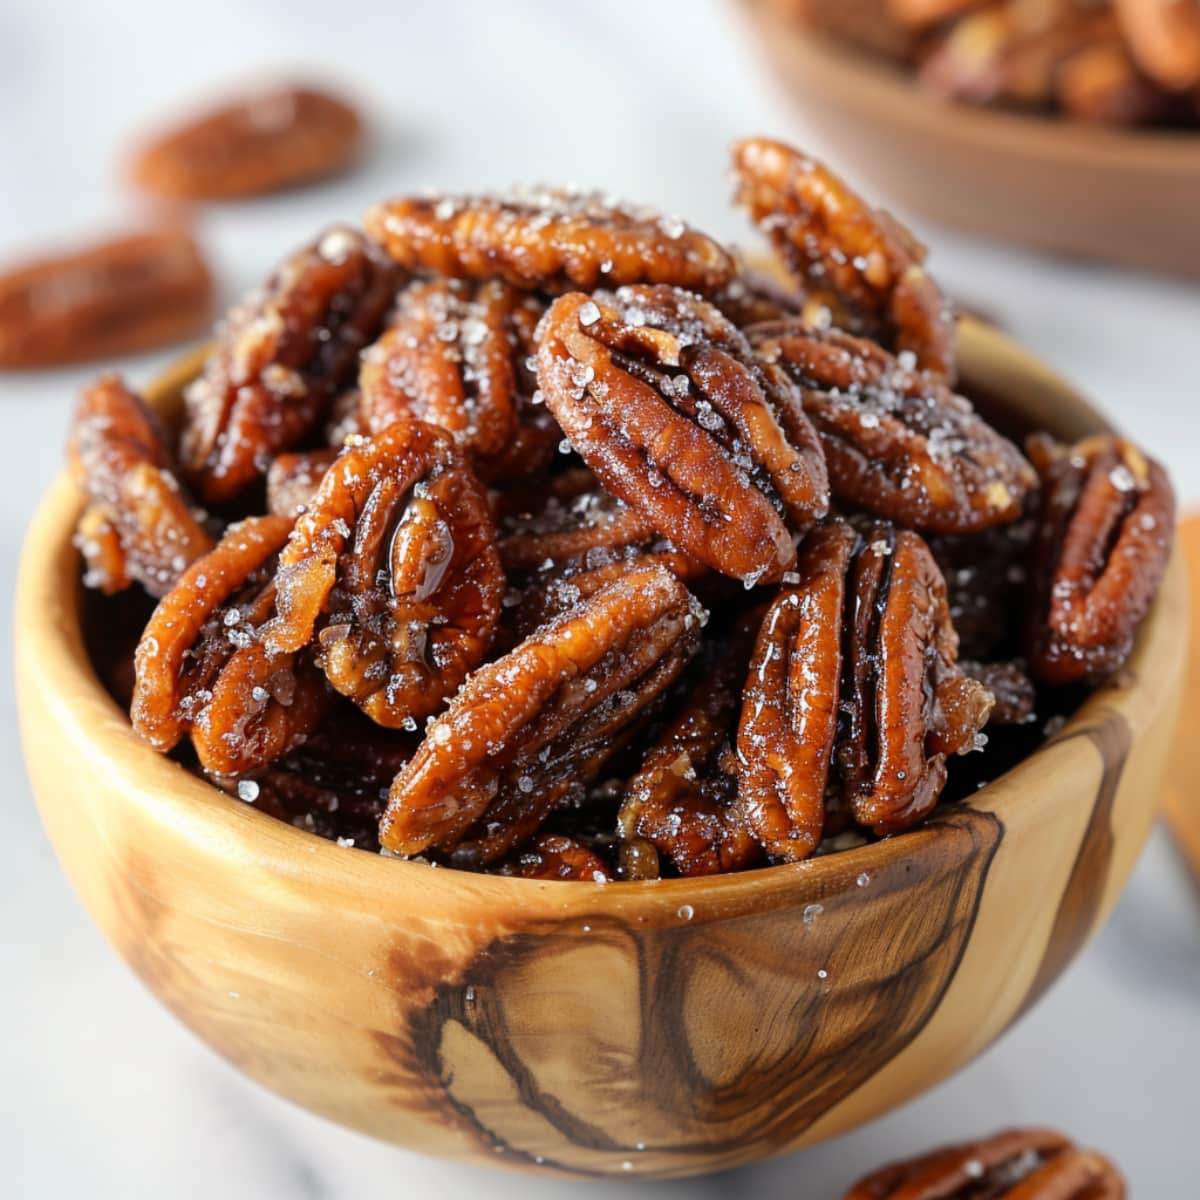 Homemade candied pecans in a brown bowl